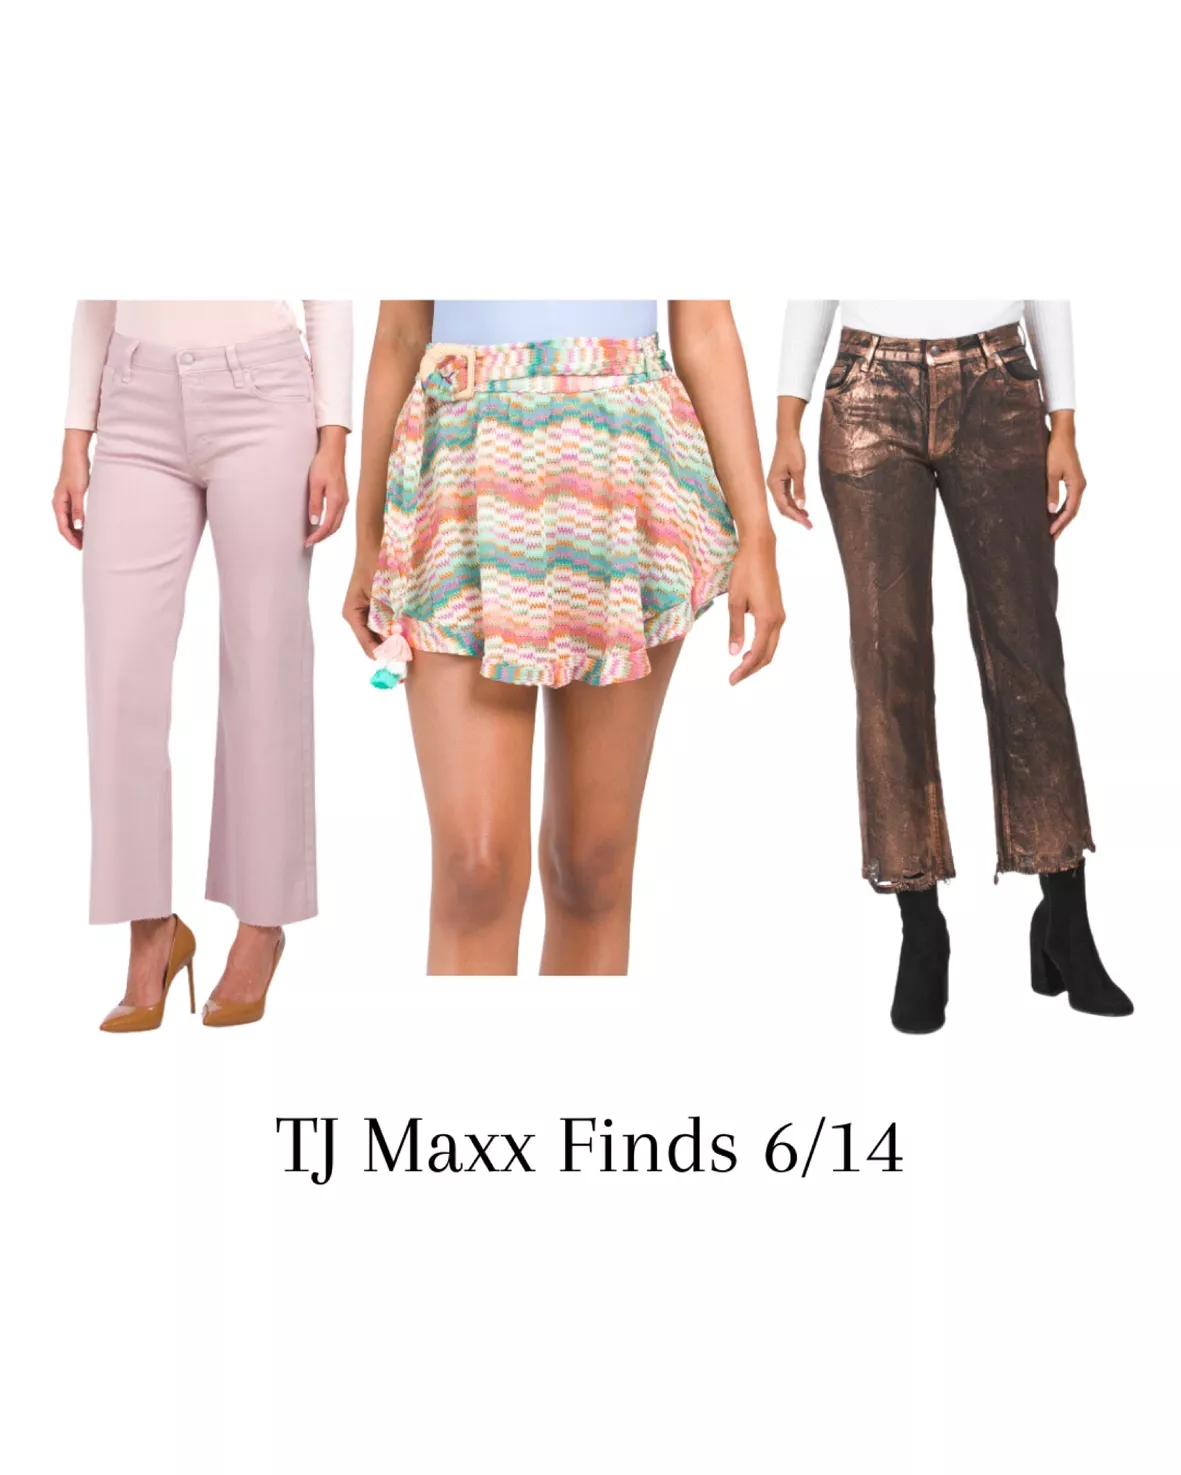 CuratedbyCely's Tj Maxx Finds Collection on LTK